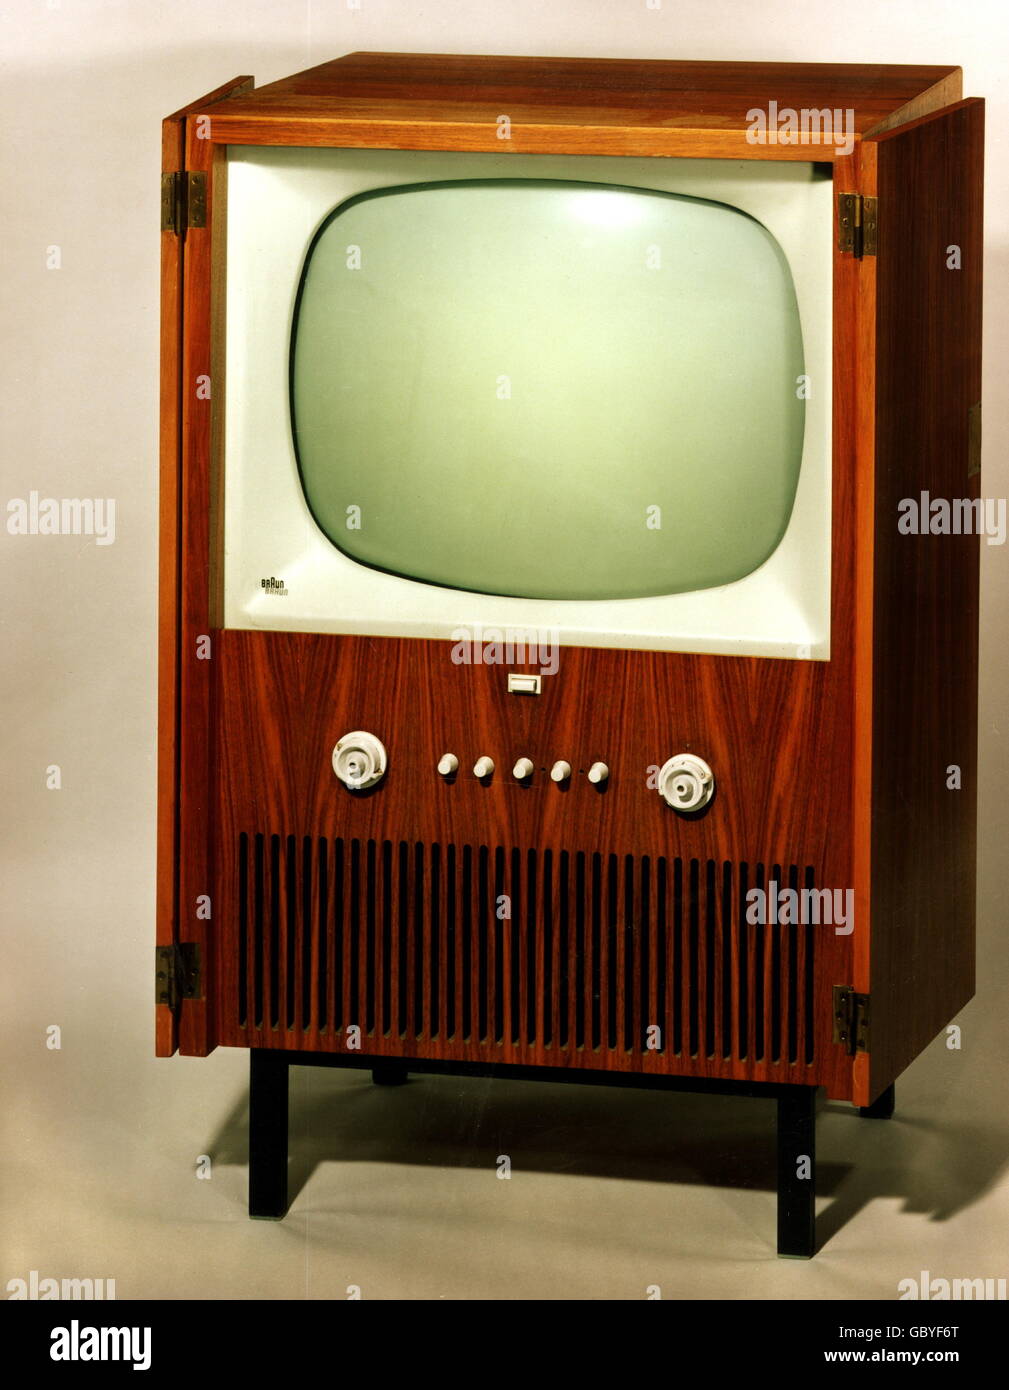 broadcast, television, tv sets, tv set Braun HFS Design, 1957, Additional-Rights-Clearences-Not Available Stock Photo